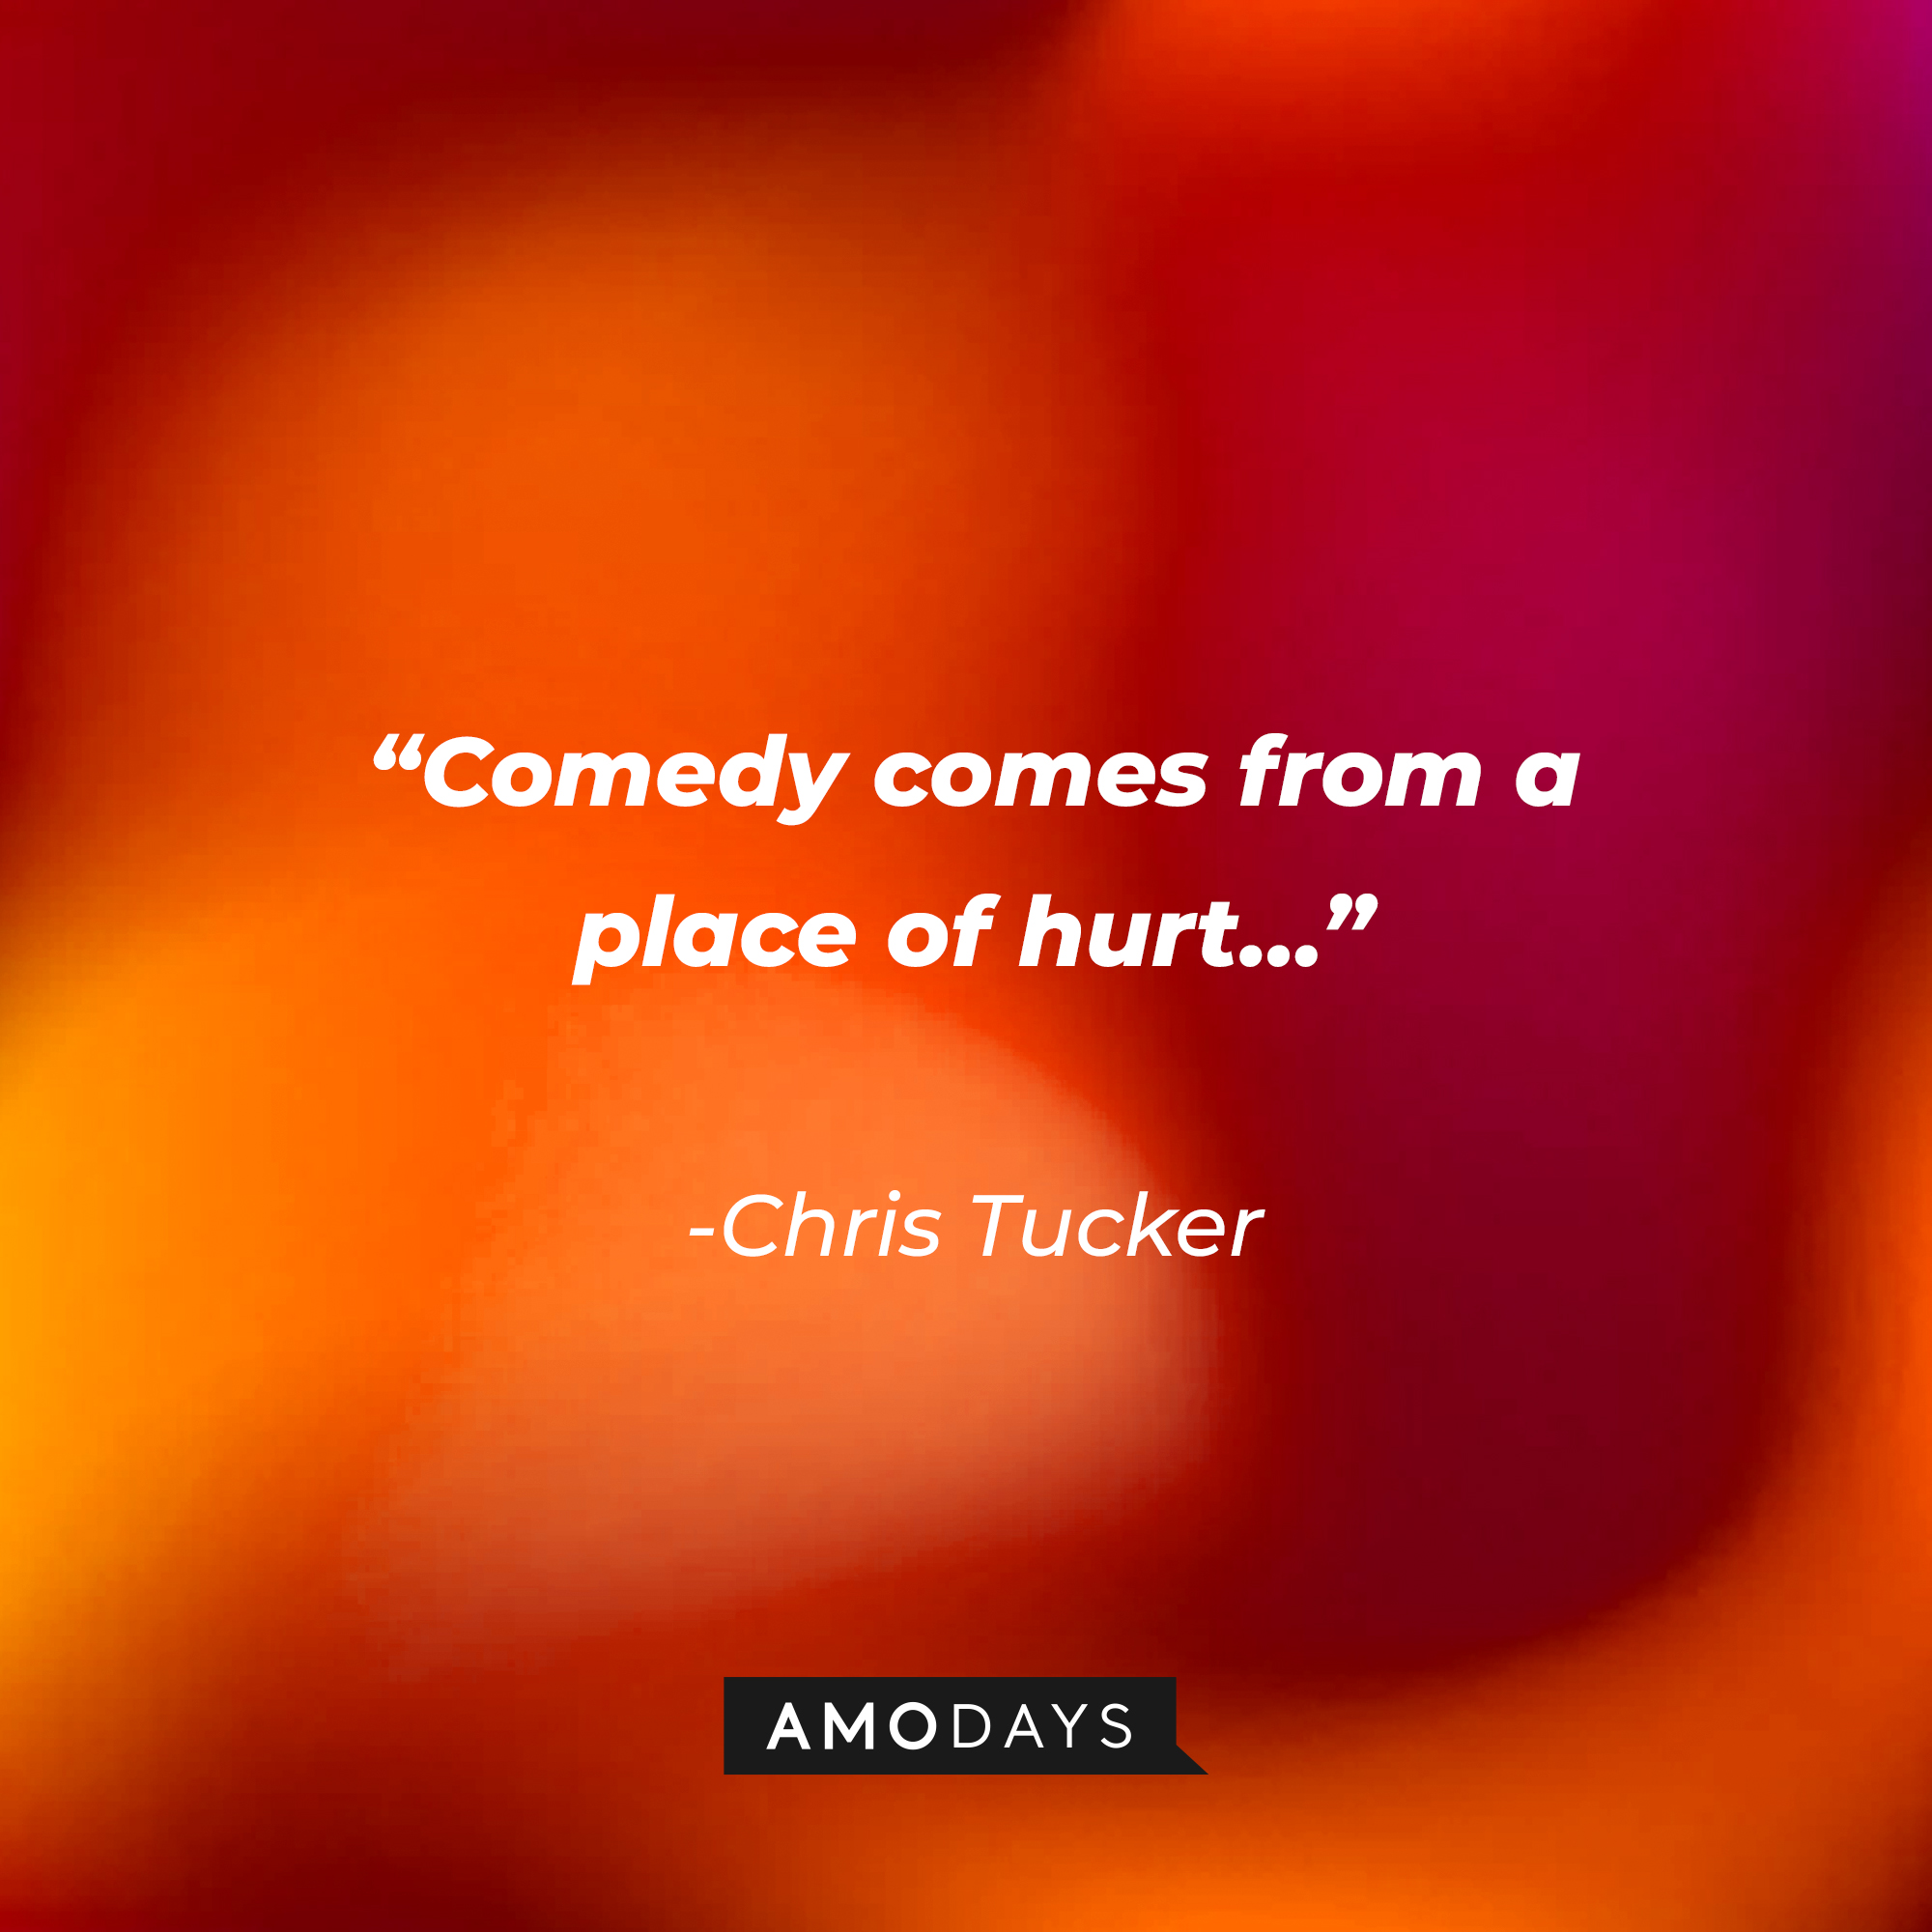 Chris Tucker’s quote: “Comedy comes from a place of hurt.”┃Source: AmoDays